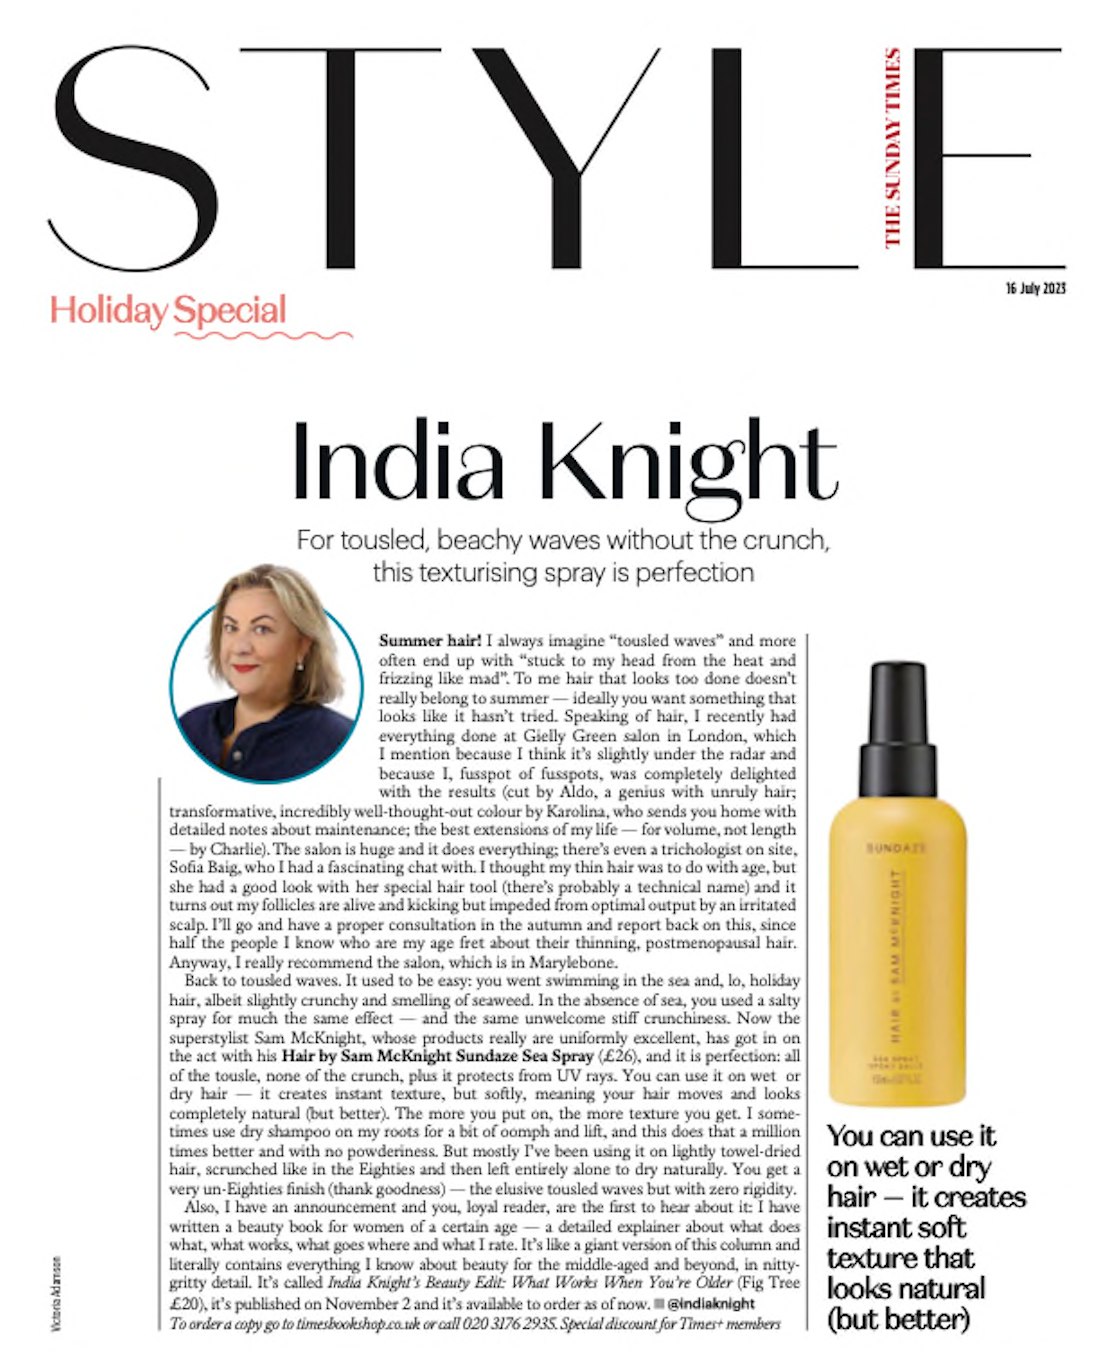 AS LOVED BY INDIA KNIGHT